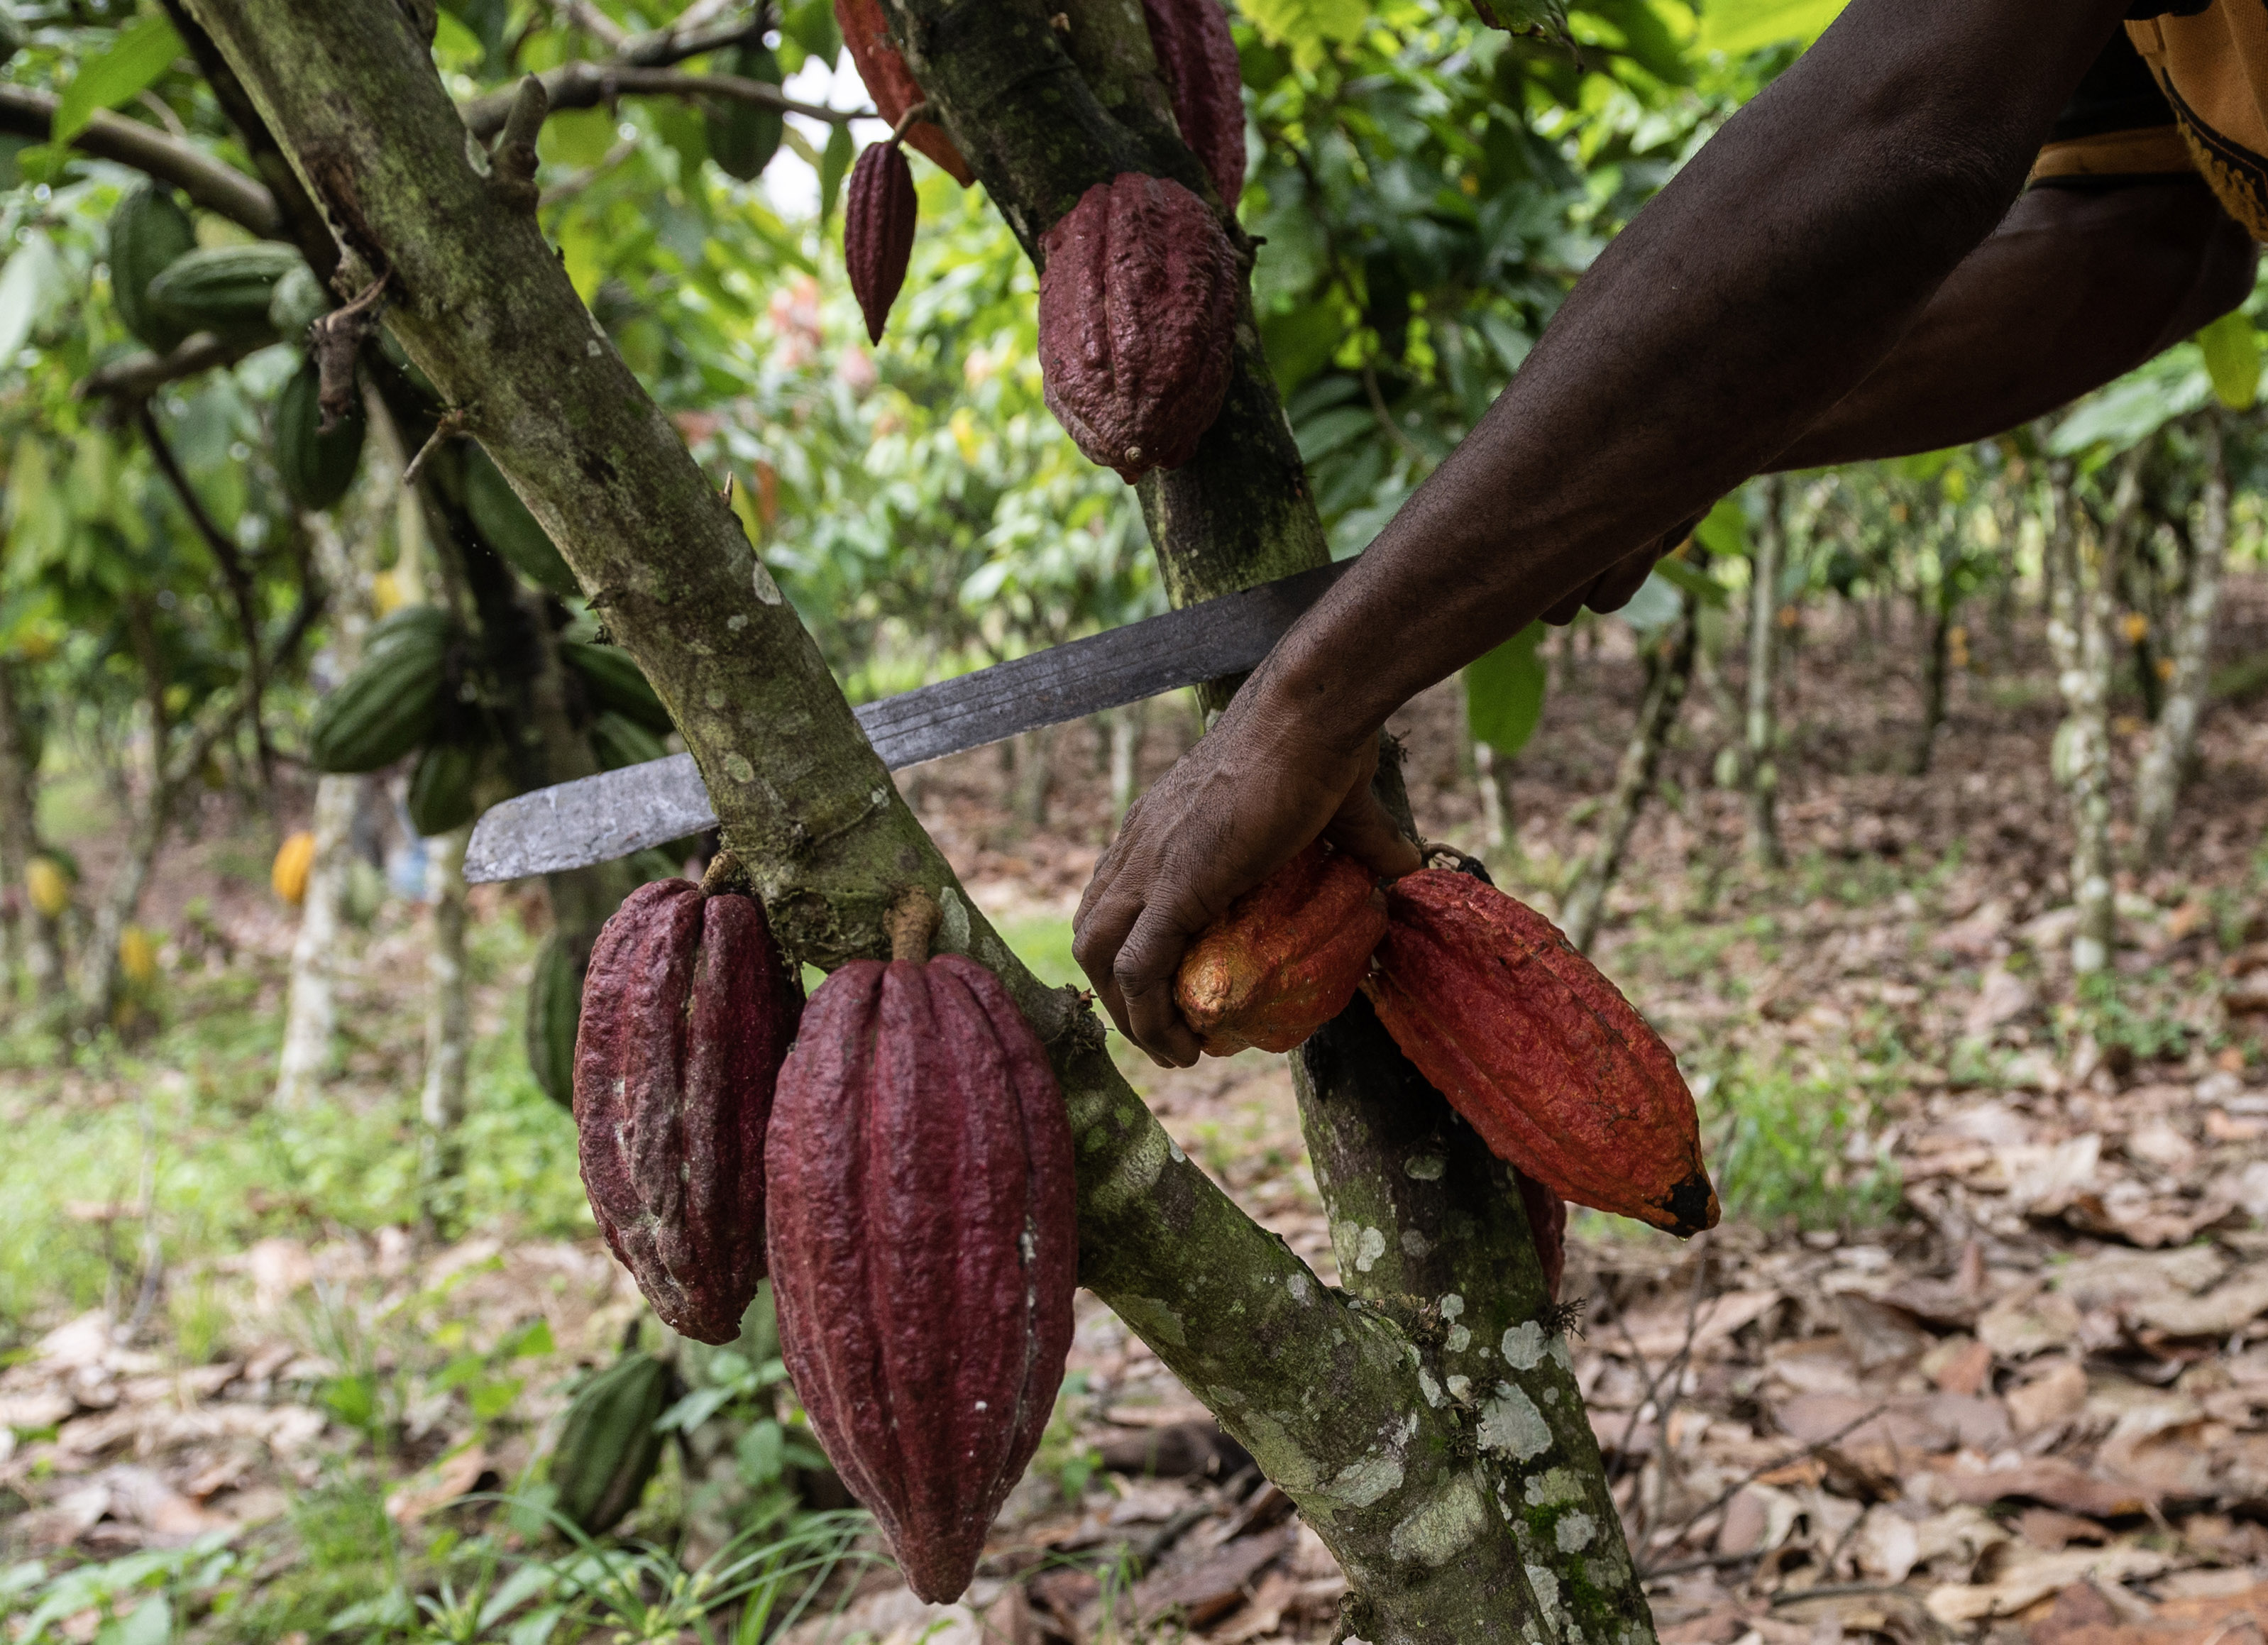 In Ivory Coast, the world’s top cocoa producer, large swaths of&nbsp;rainforest have been destroyed to grow more cocoa.